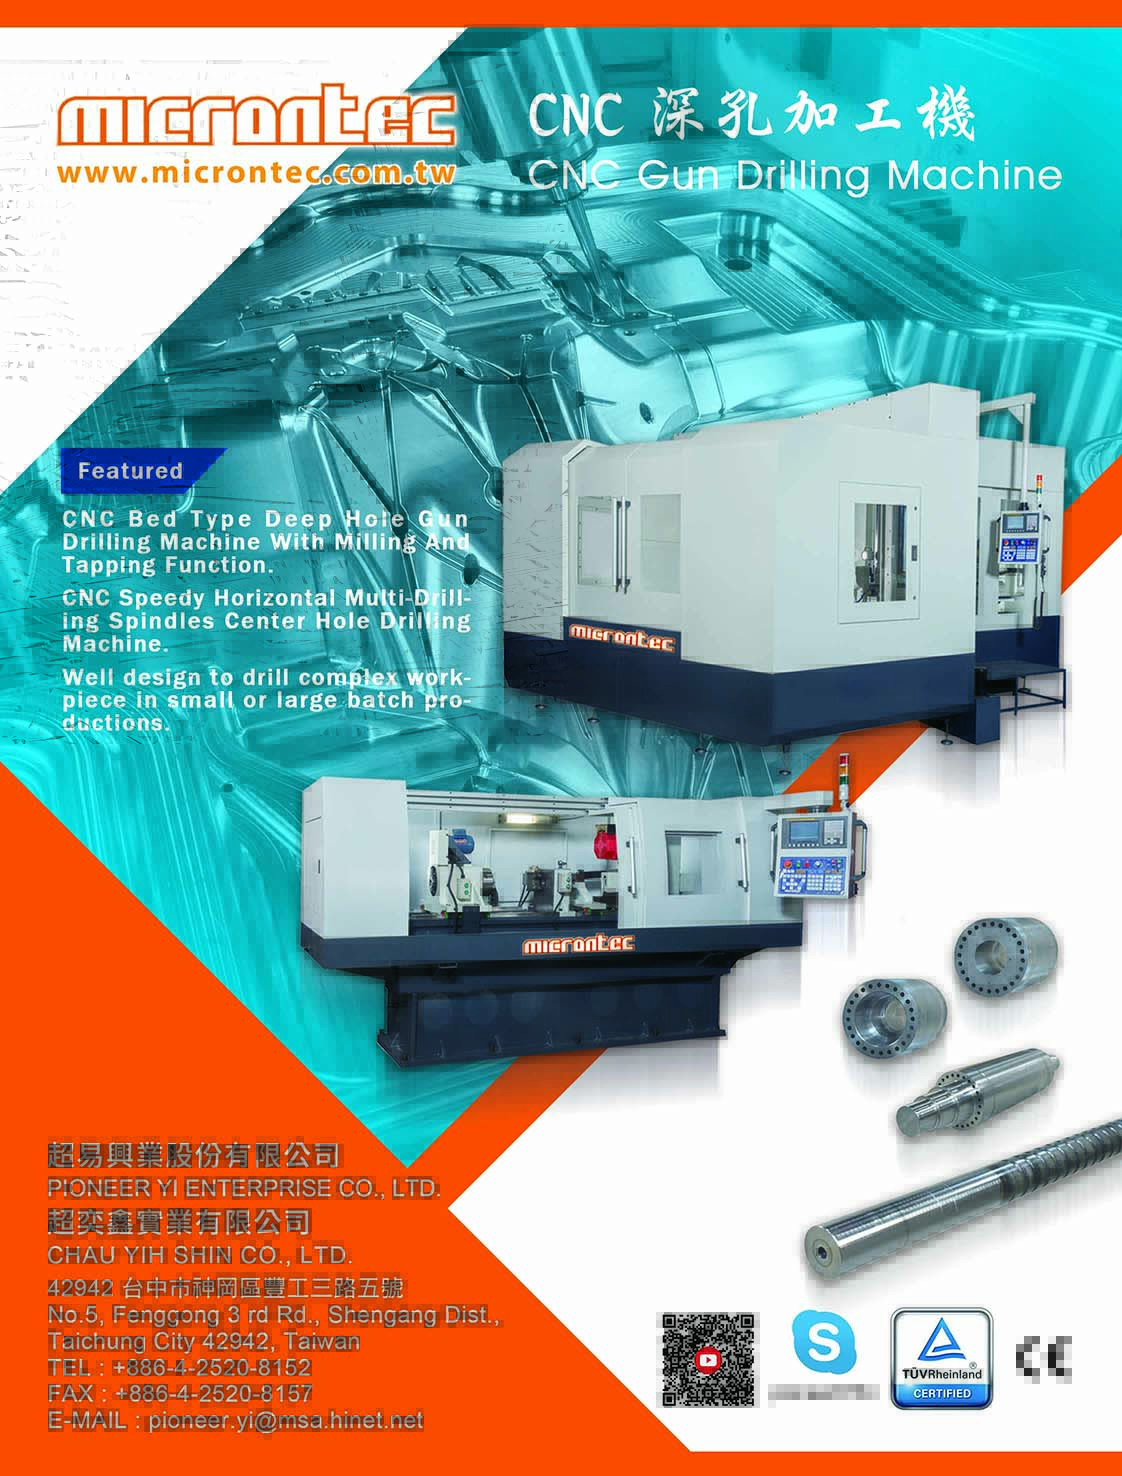 2023 TAIWAN MOLD & MOLDING PRODUCTS